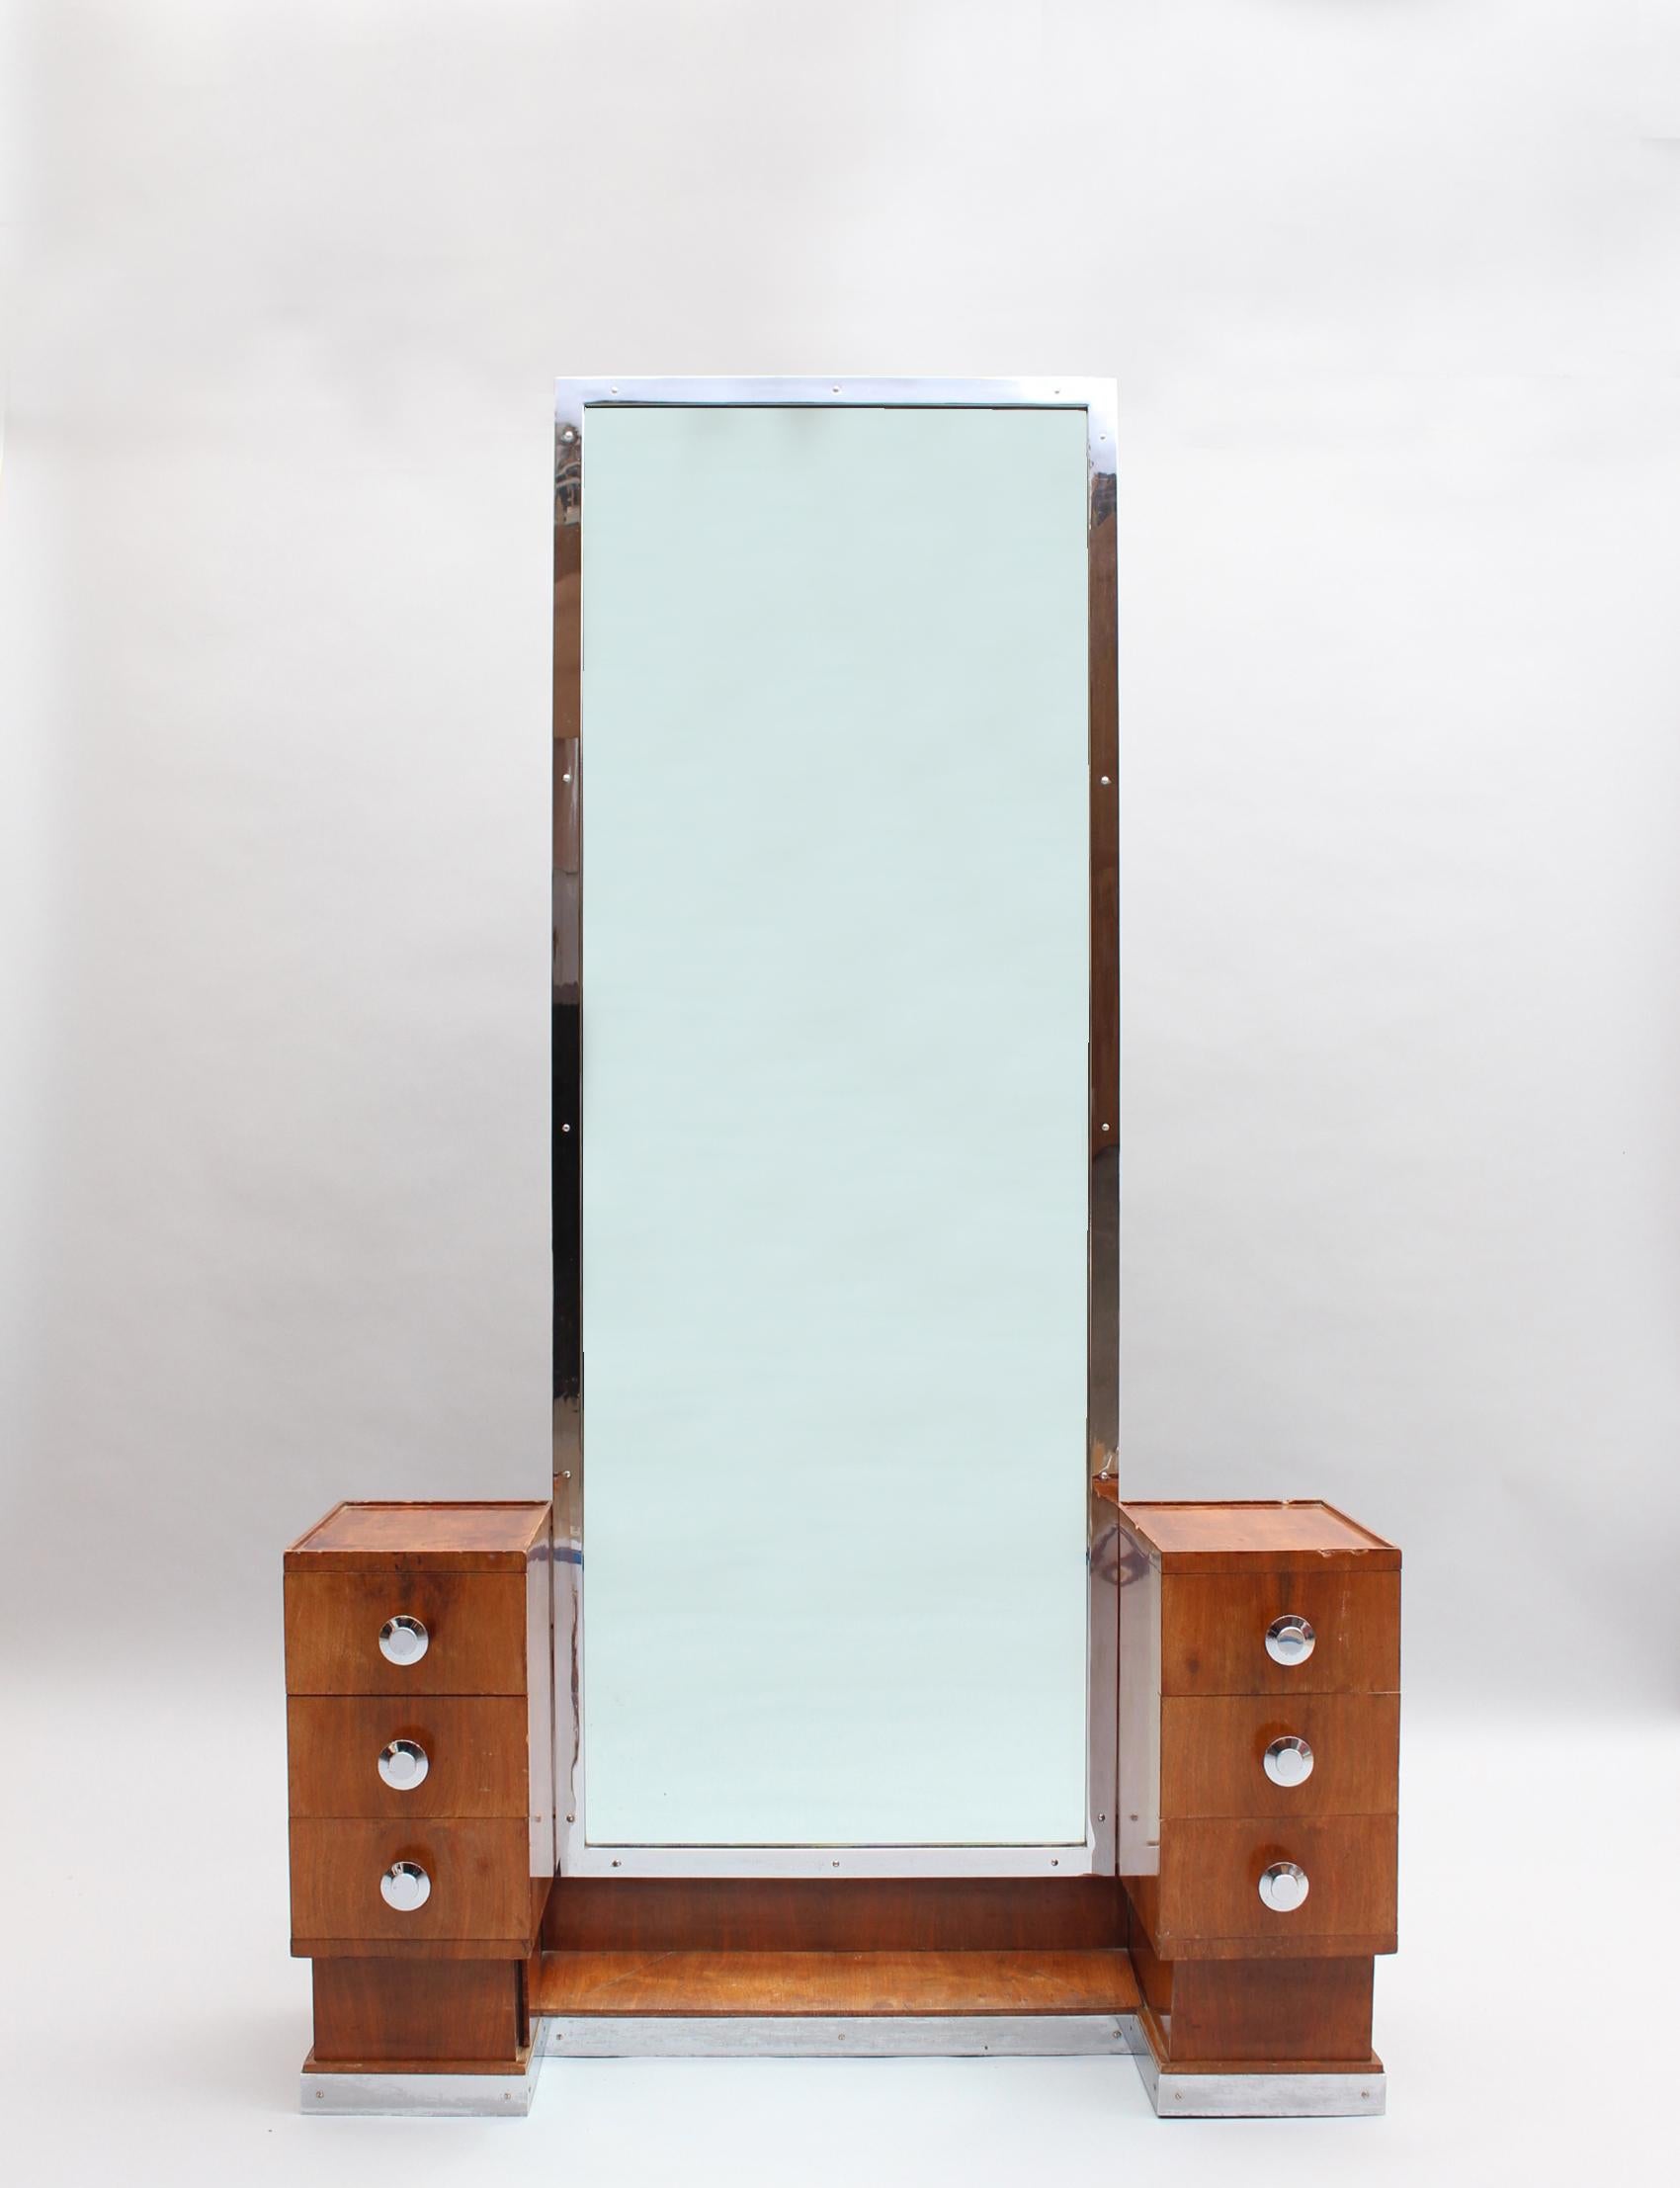 A fine French 1930s wooden psyche / vanity with six drawers, one secret drawer, a chrome framed mirror, and chrome baseboard and knobs. The back of the piece is also veneered so it could be placed in the middle of a room.